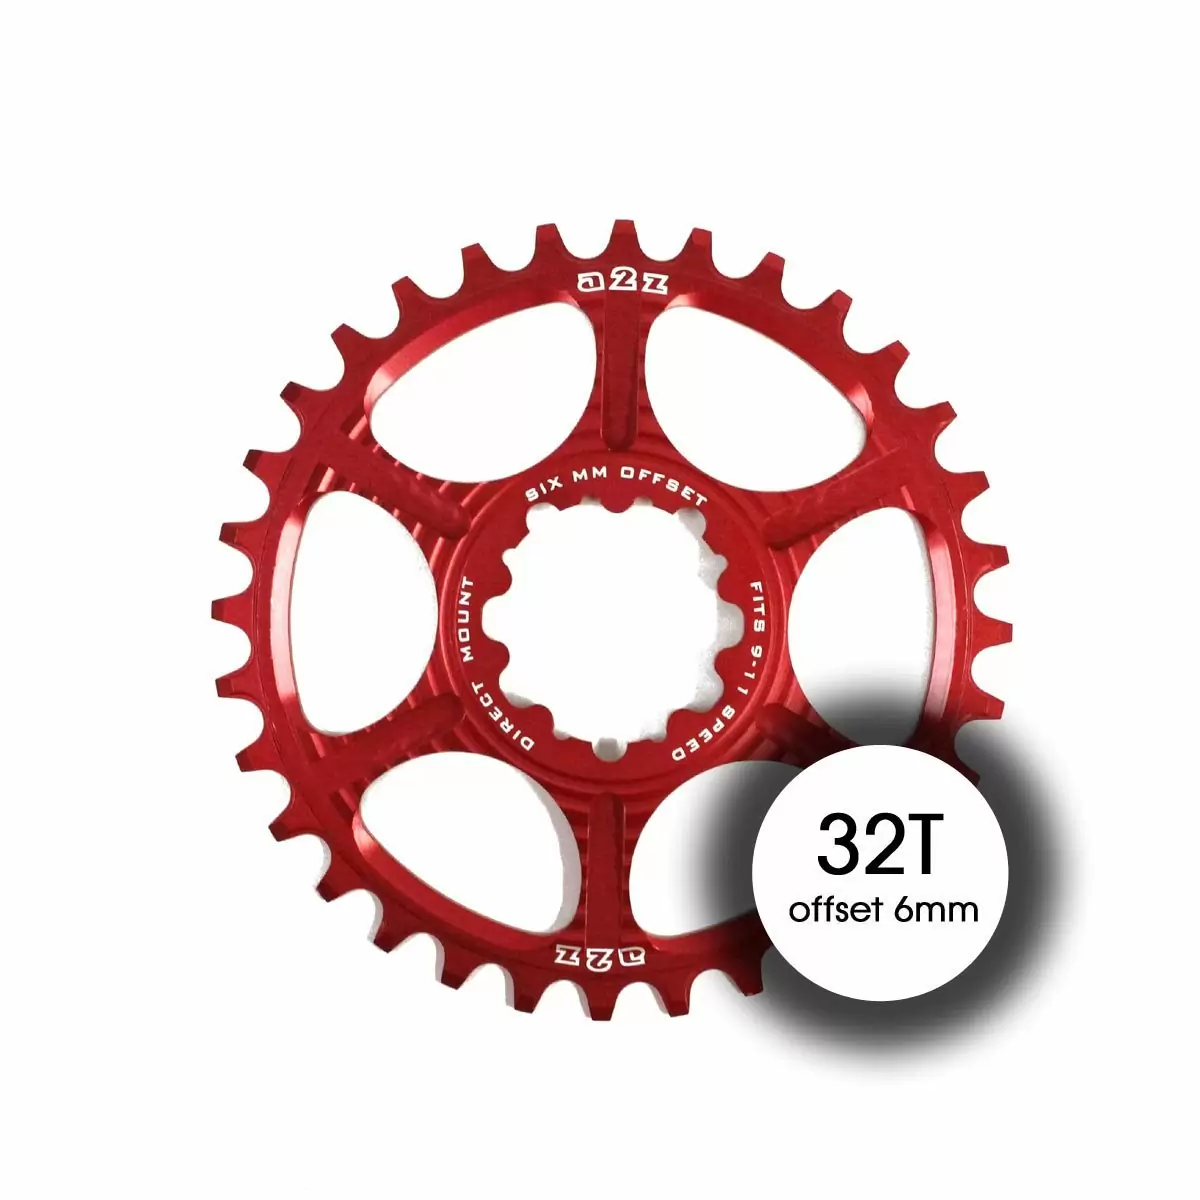 Chainring Direct Mount 32T offset 6mm 9-11sp red - image